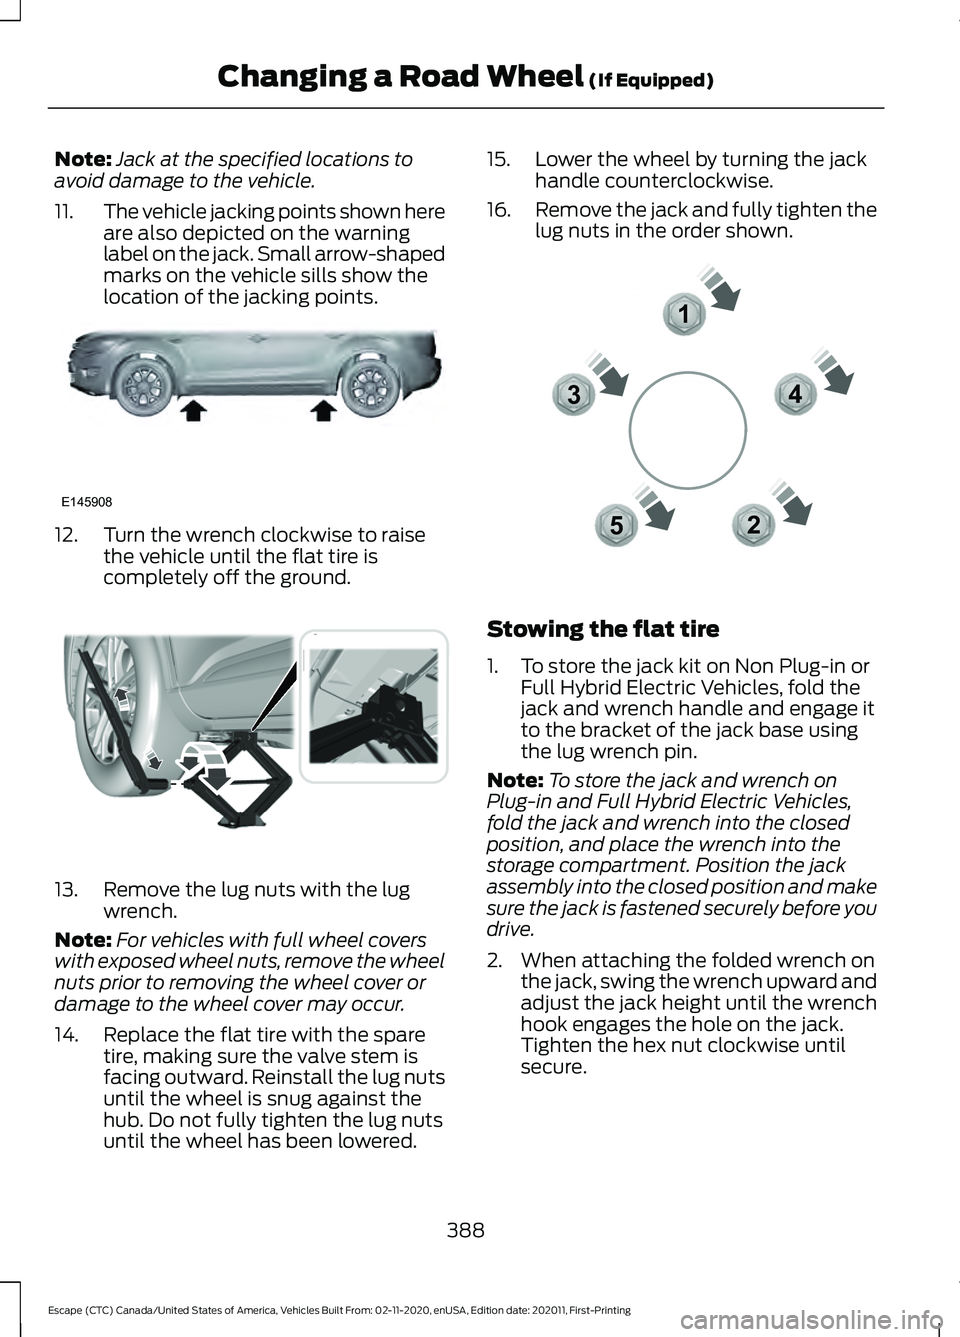 FORD ESCAPE 2021 User Guide Note:
Jack at the specified locations to
avoid damage to the vehicle.
11. The vehicle jacking points shown here
are also depicted on the warning
label on the jack. Small arrow-shaped
marks on the vehi